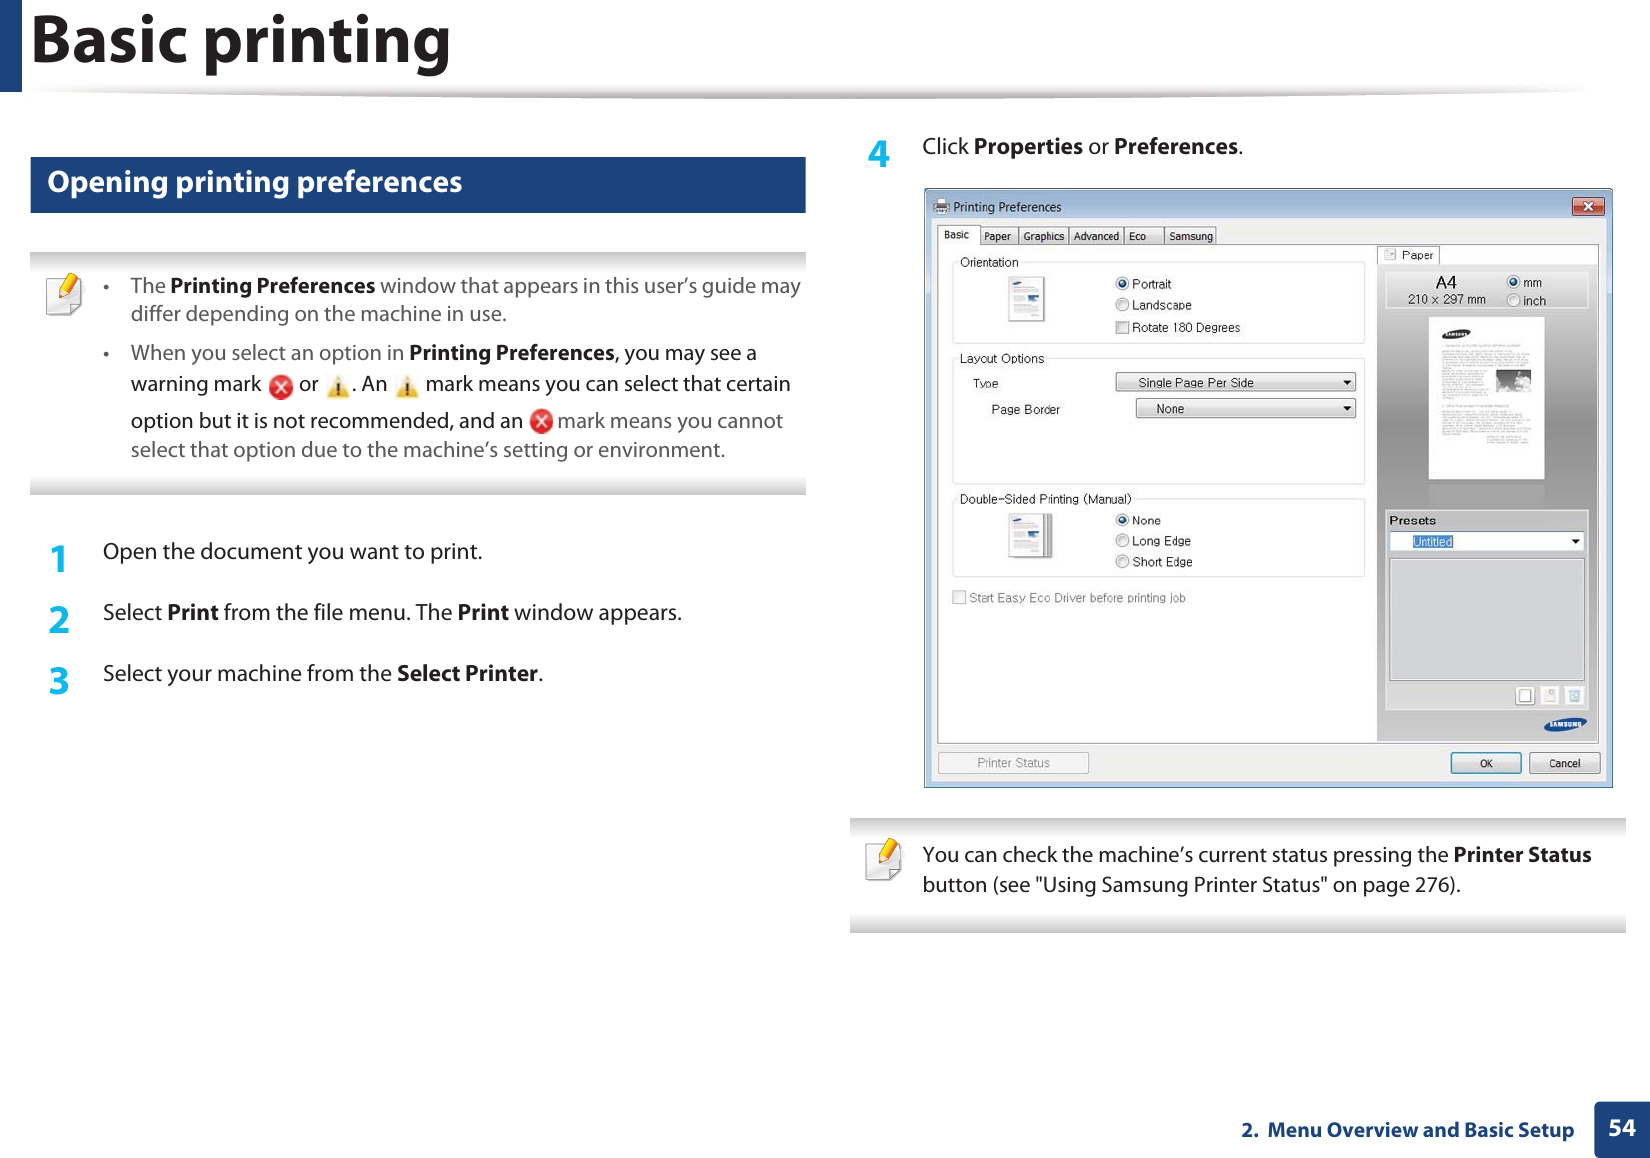 Basic printing542.  Menu Overview and Basic Setup12 Opening printing preferences • The Printing Preferences window that appears in this user’s guide may differ depending on the machine in use. • When you select an option in Printing Preferences, you may see a warning mark   or  . An   mark means you can select that certain option but it is not recommended, and an   mark means you cannot select that option due to the machine’s setting or environment. 1Open the document you want to print.2  Select Print from the file menu. The Print window appears. 3  Select your machine from the Select Printer. 4  Click Properties or Preferences.  You can check the machine’s current status pressing the Printer Status button (see &quot;Using Samsung Printer Status&quot; on page 276). 